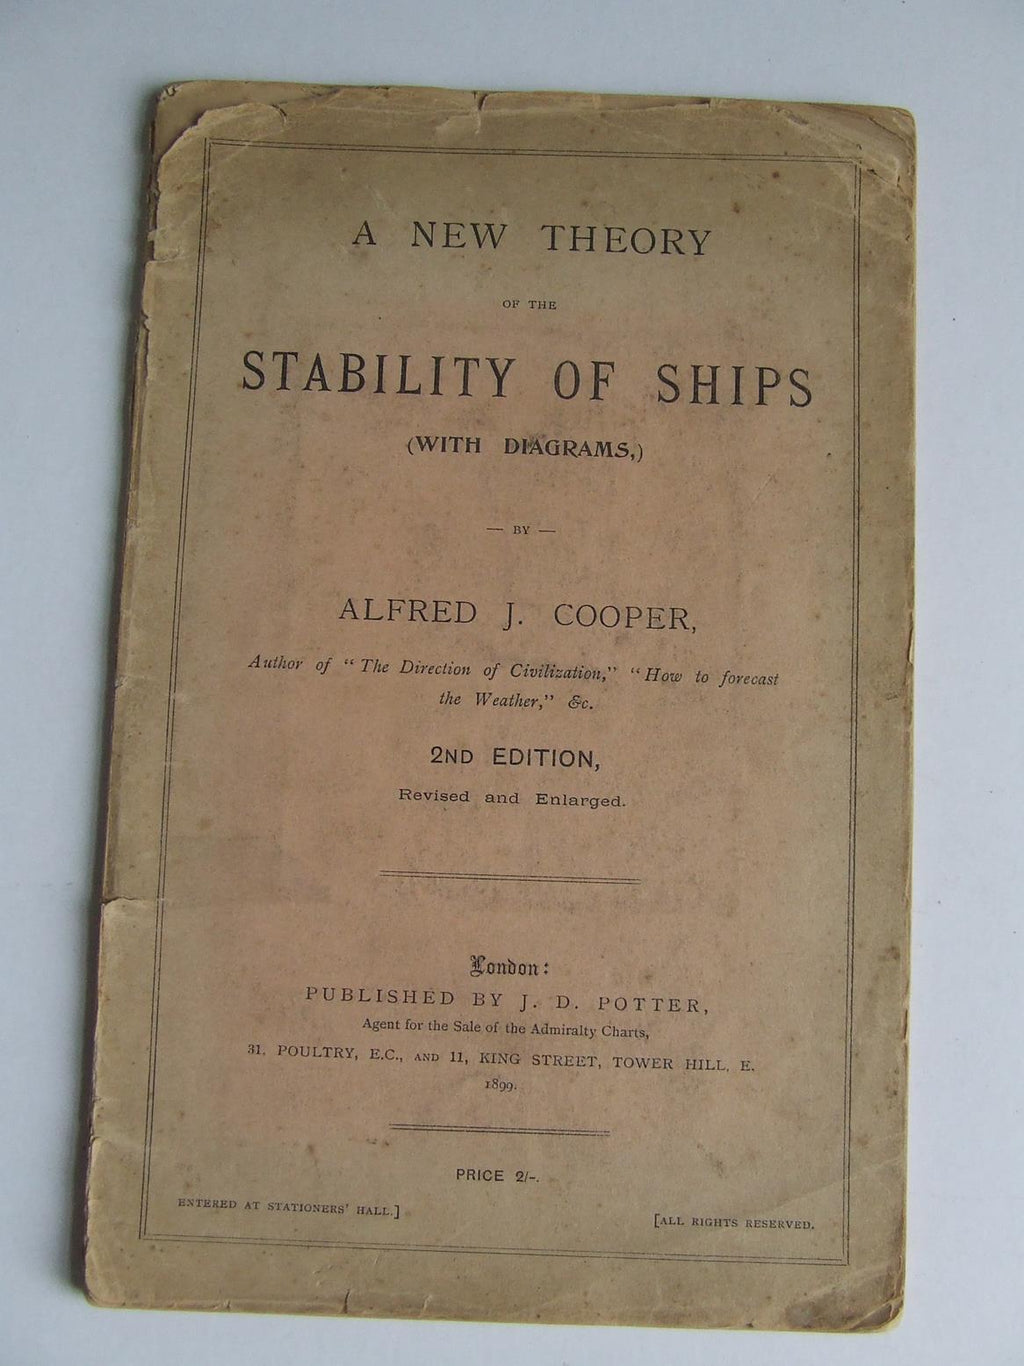 A New Theory of the Stability of Ships (with diagrams)